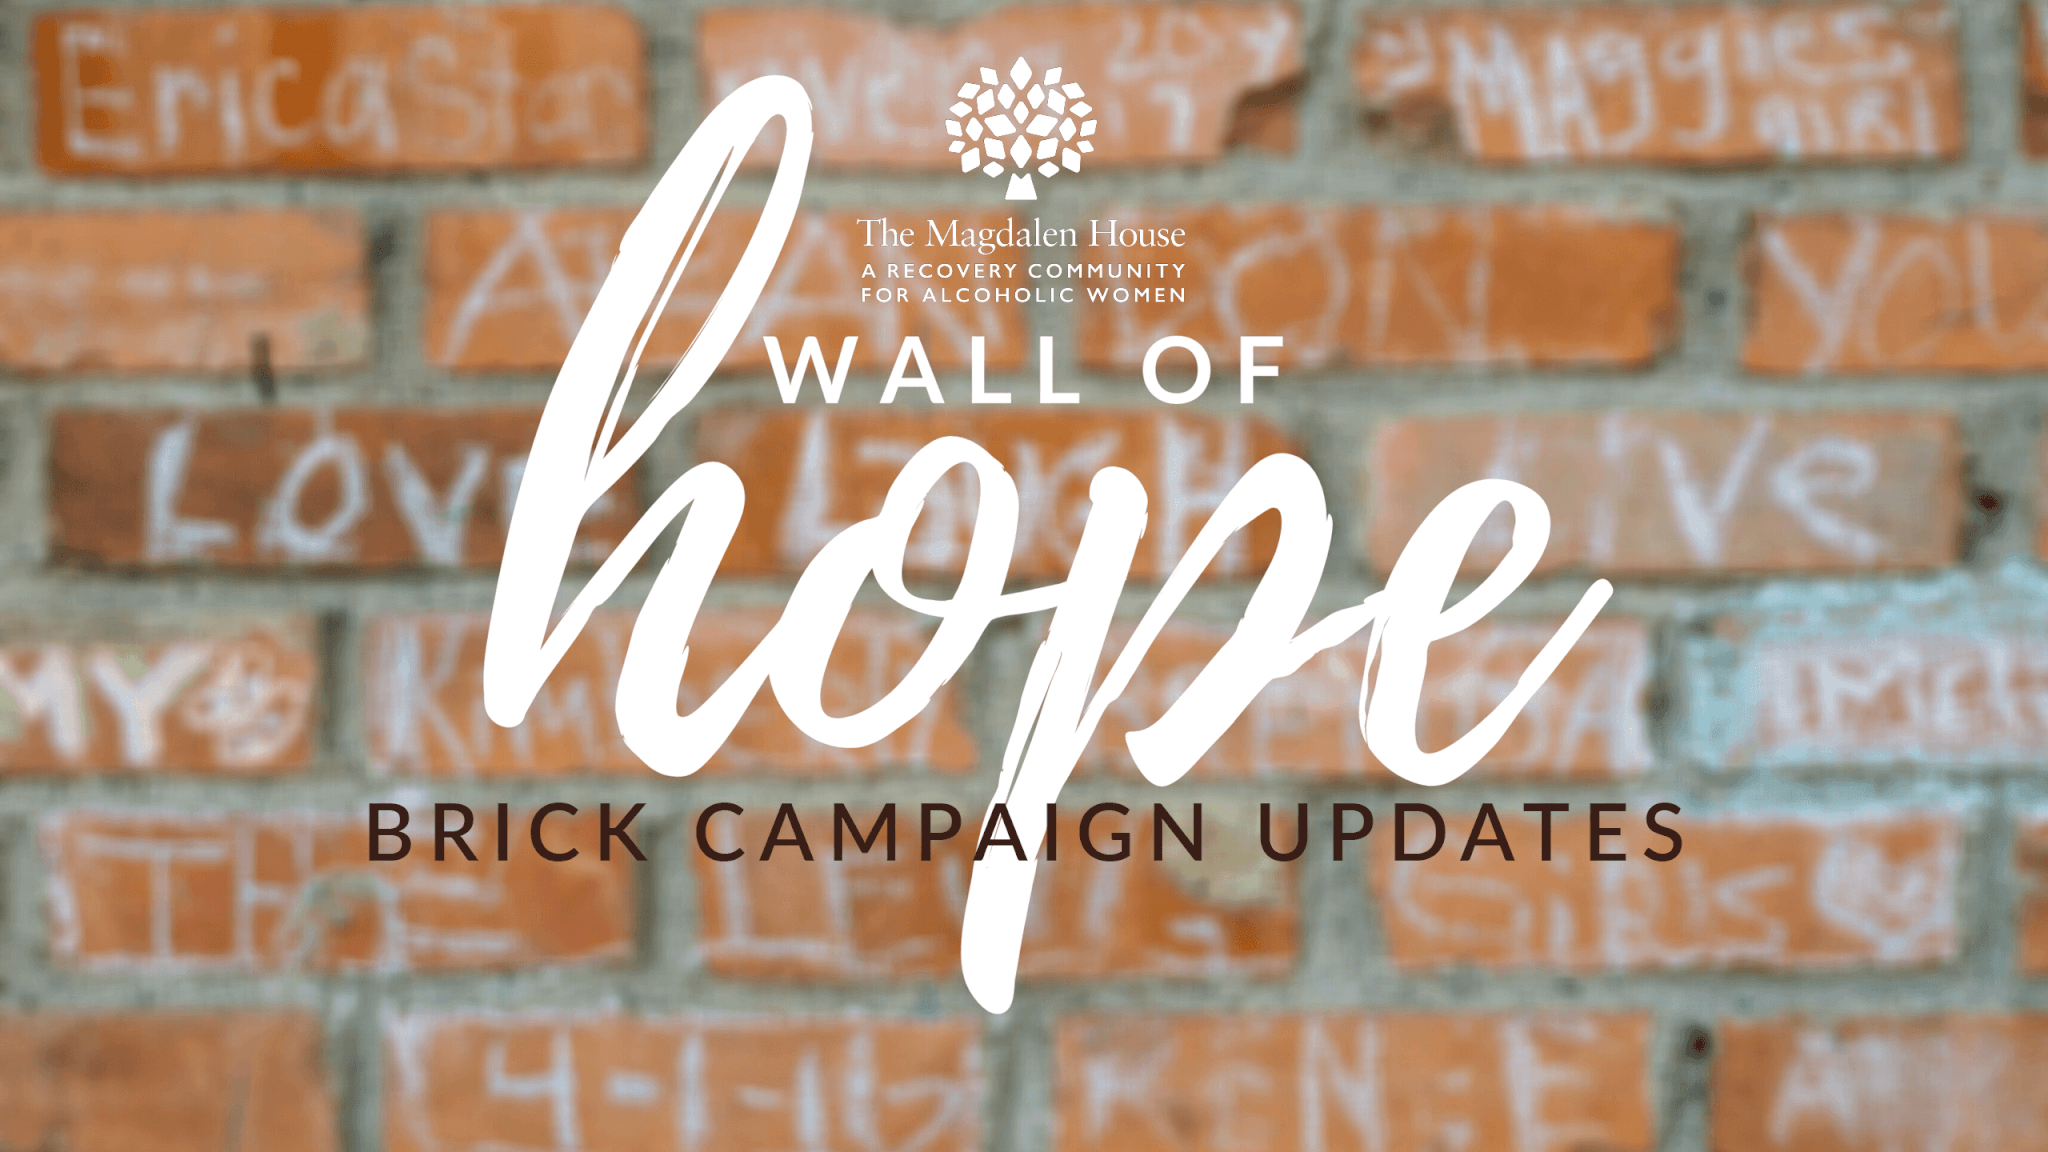 3 Quick Updates: Wall of Hope Brick Campaign